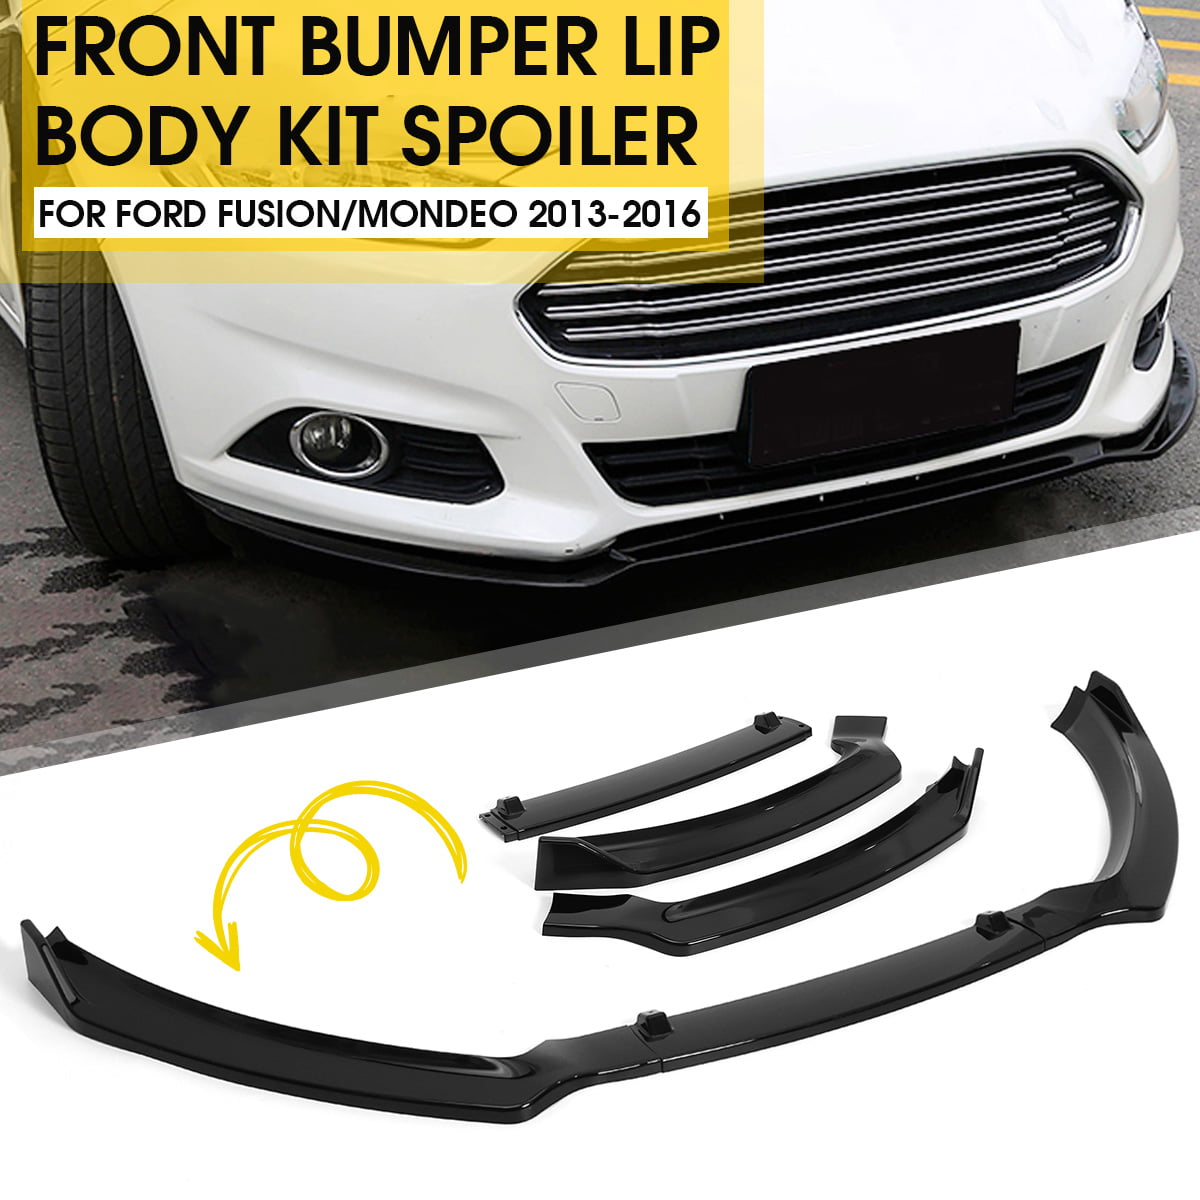 for ford fusion mondeo 2013 2016 gloss black front bumper lip body kit spoiler instruction not included walmart com walmart com